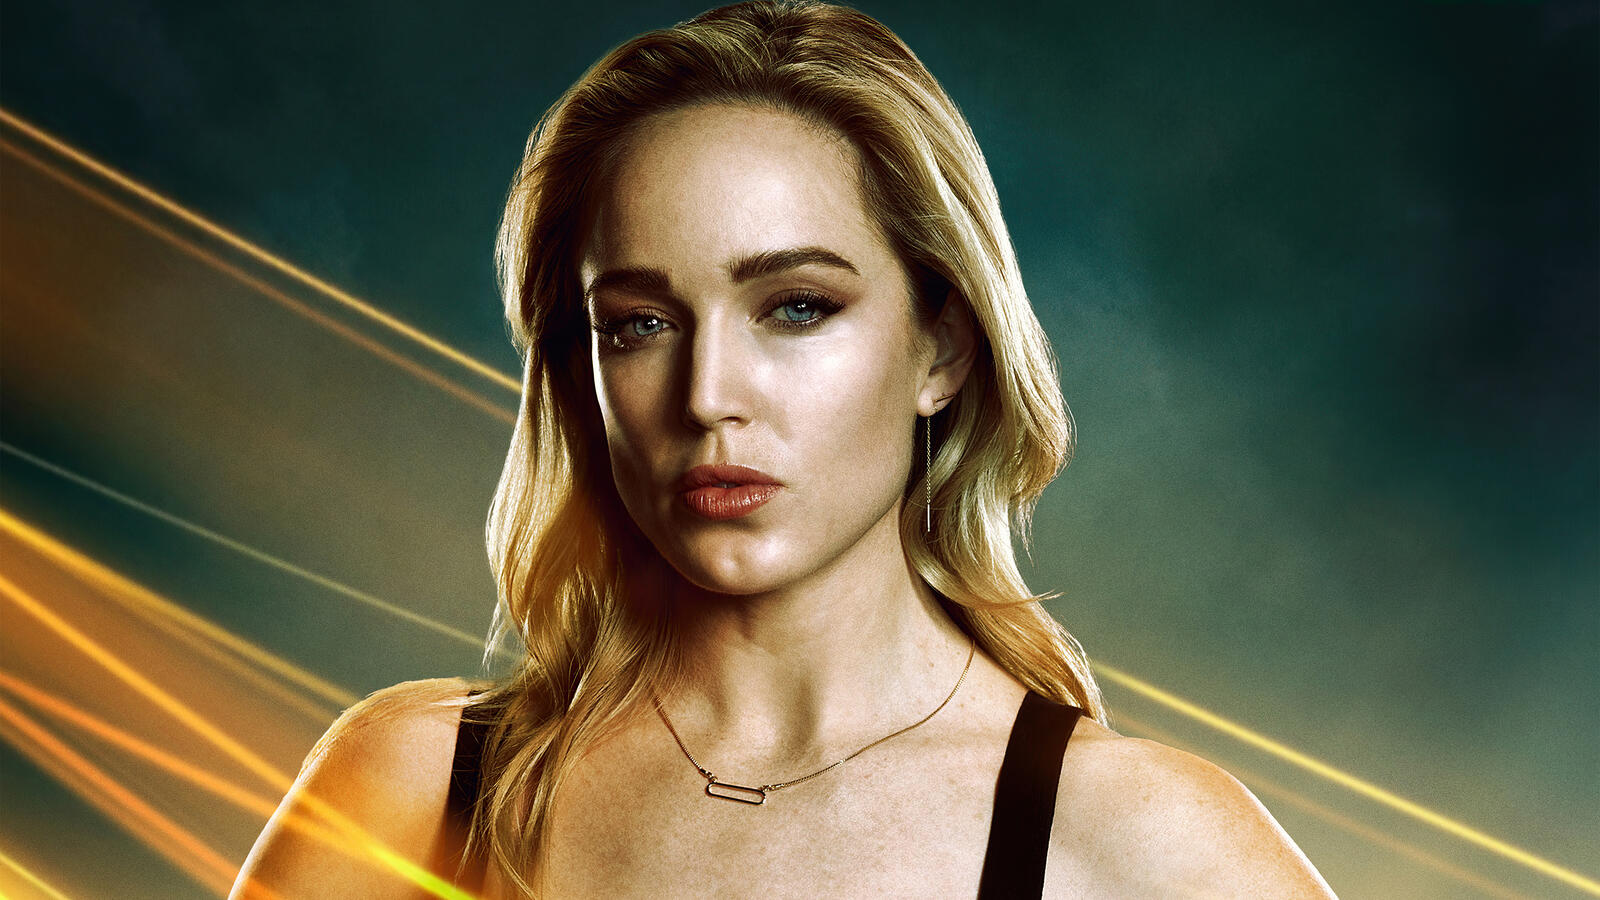 Wallpapers Caity Lotz Black canary legends of tomorrow on the desktop